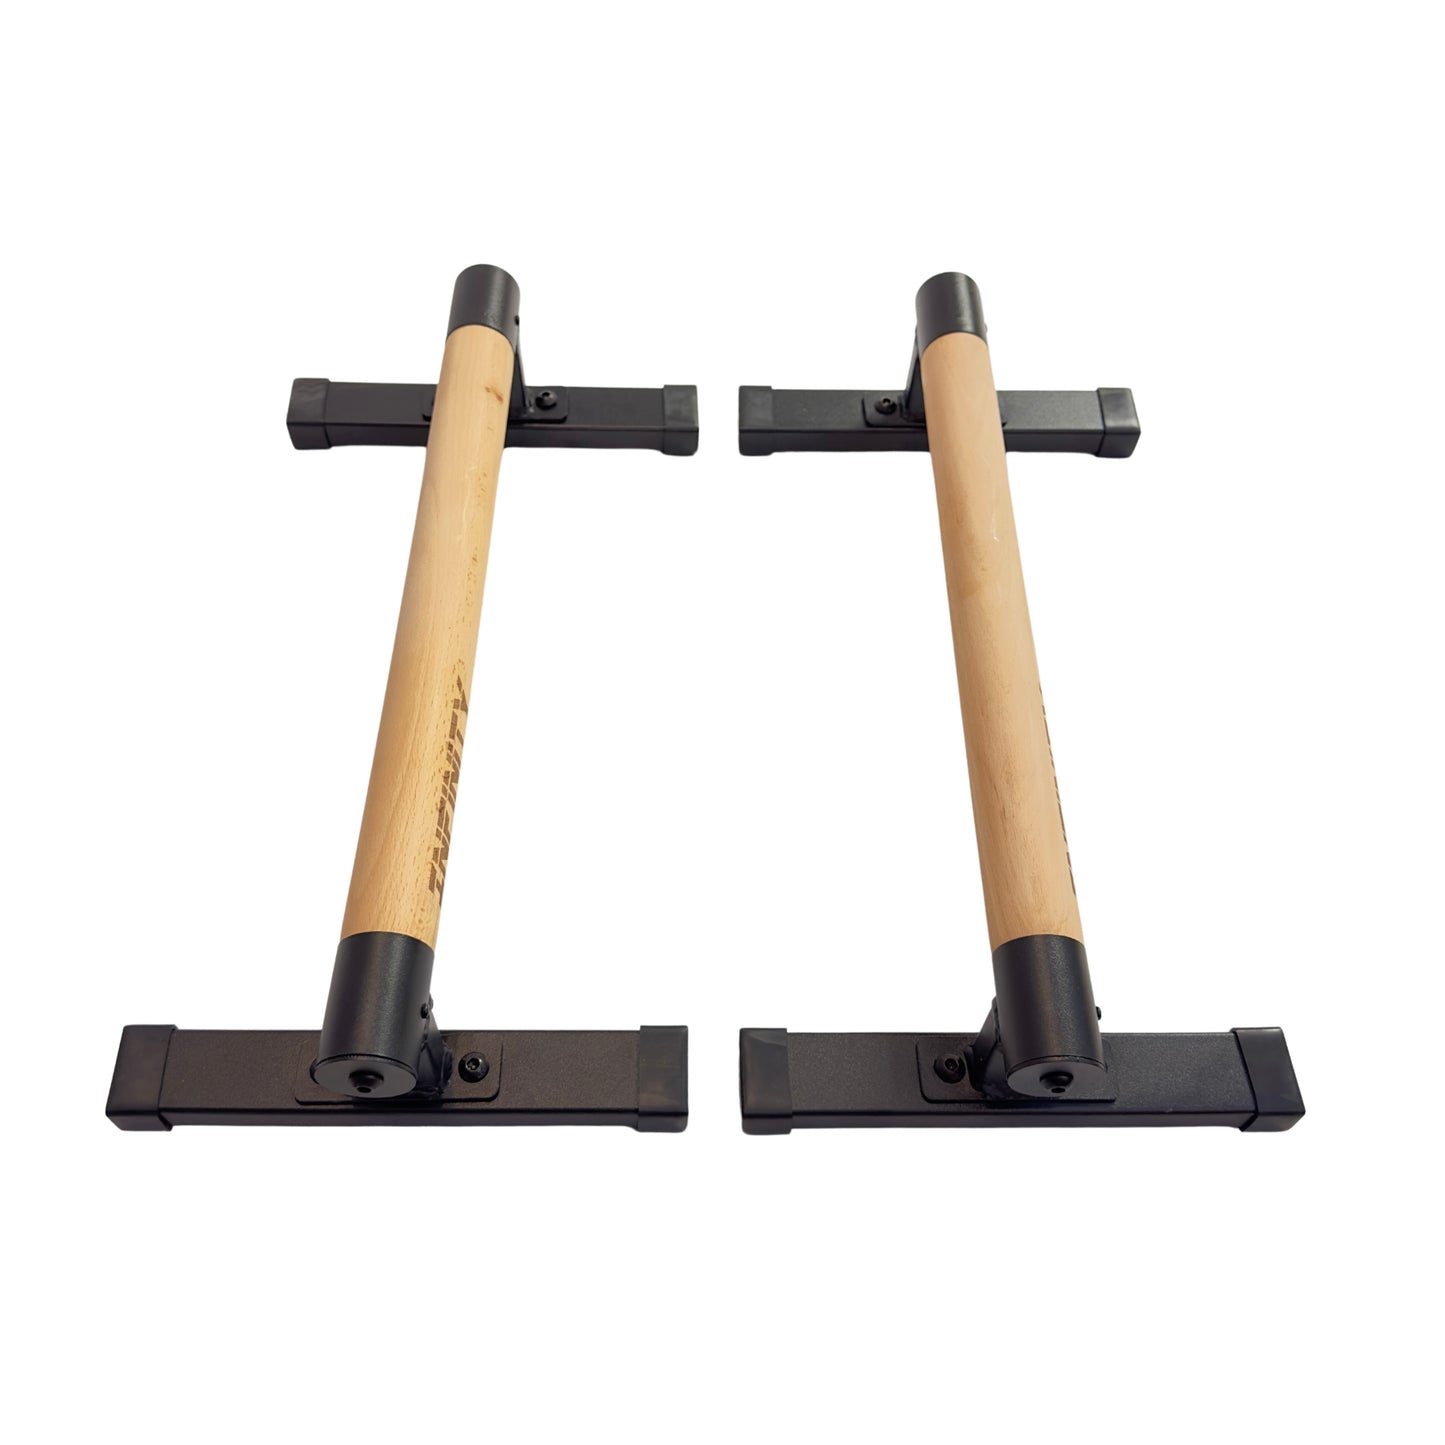 Long Parallettes with Wooden Handles For Callisthenics gymnastics Crossfit handstand planche